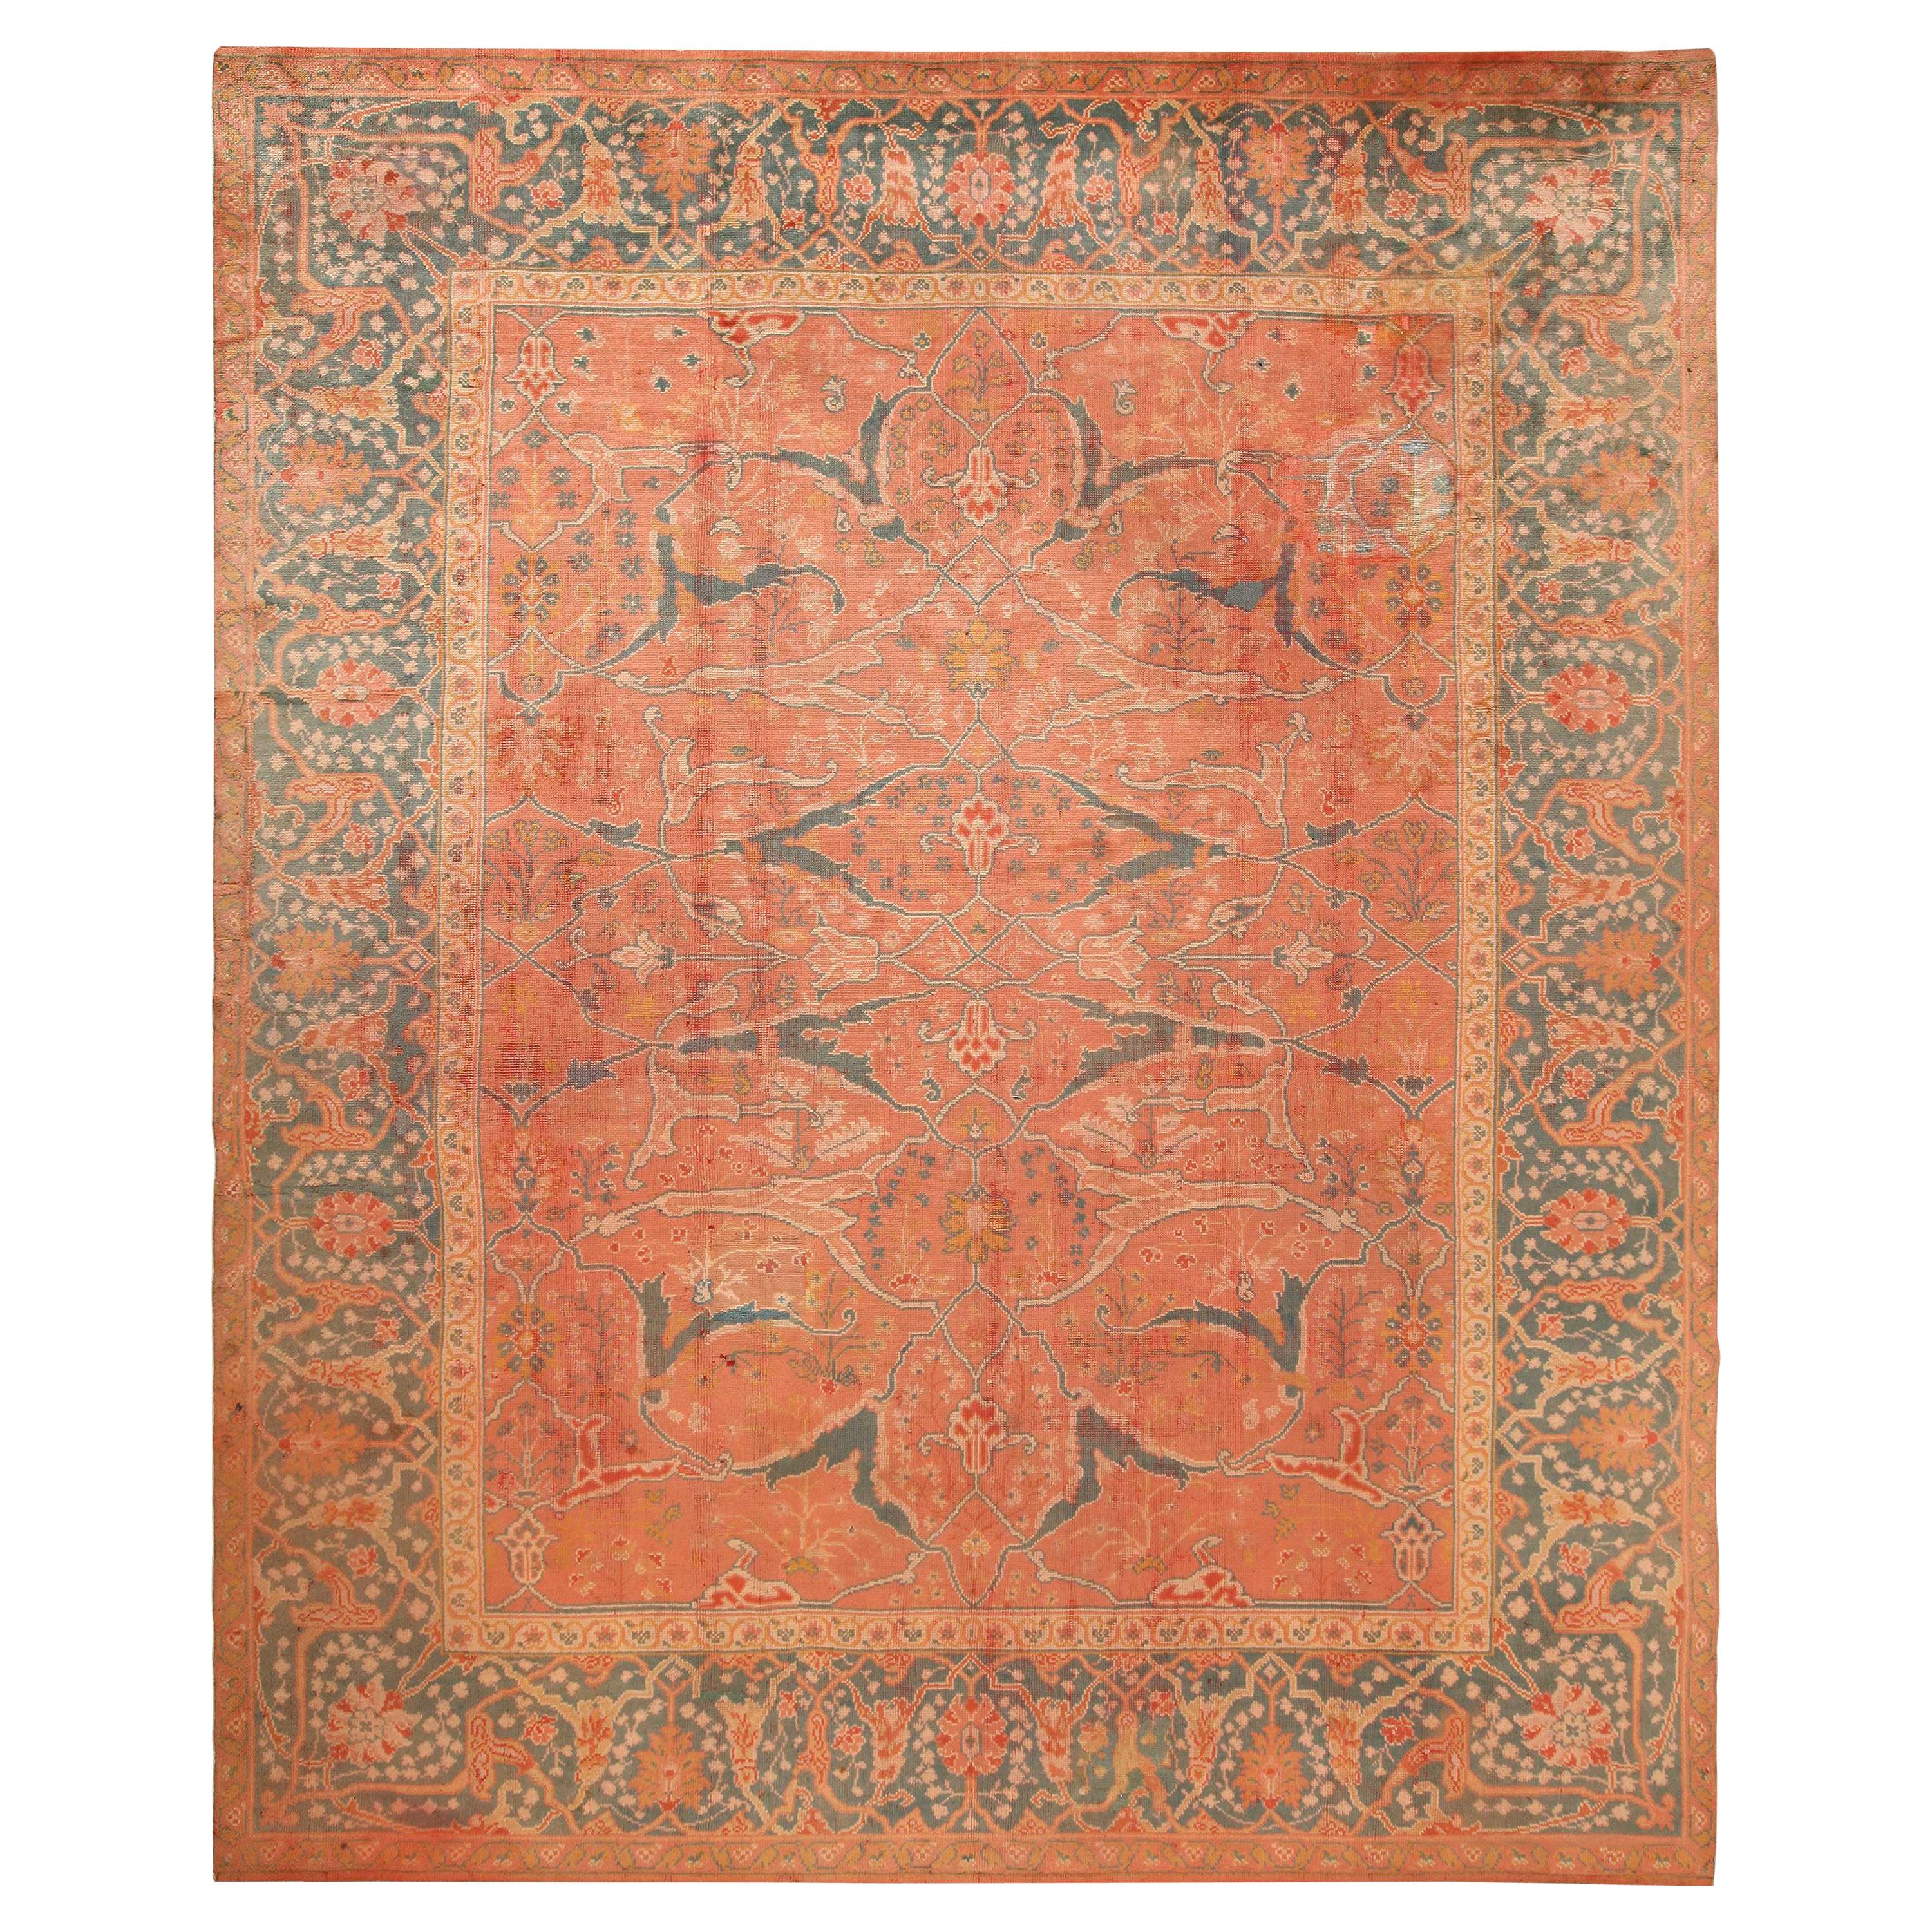 Coral Antique Turkish Oushak Rug. 12 ft 9 in x 16 ft 2 in